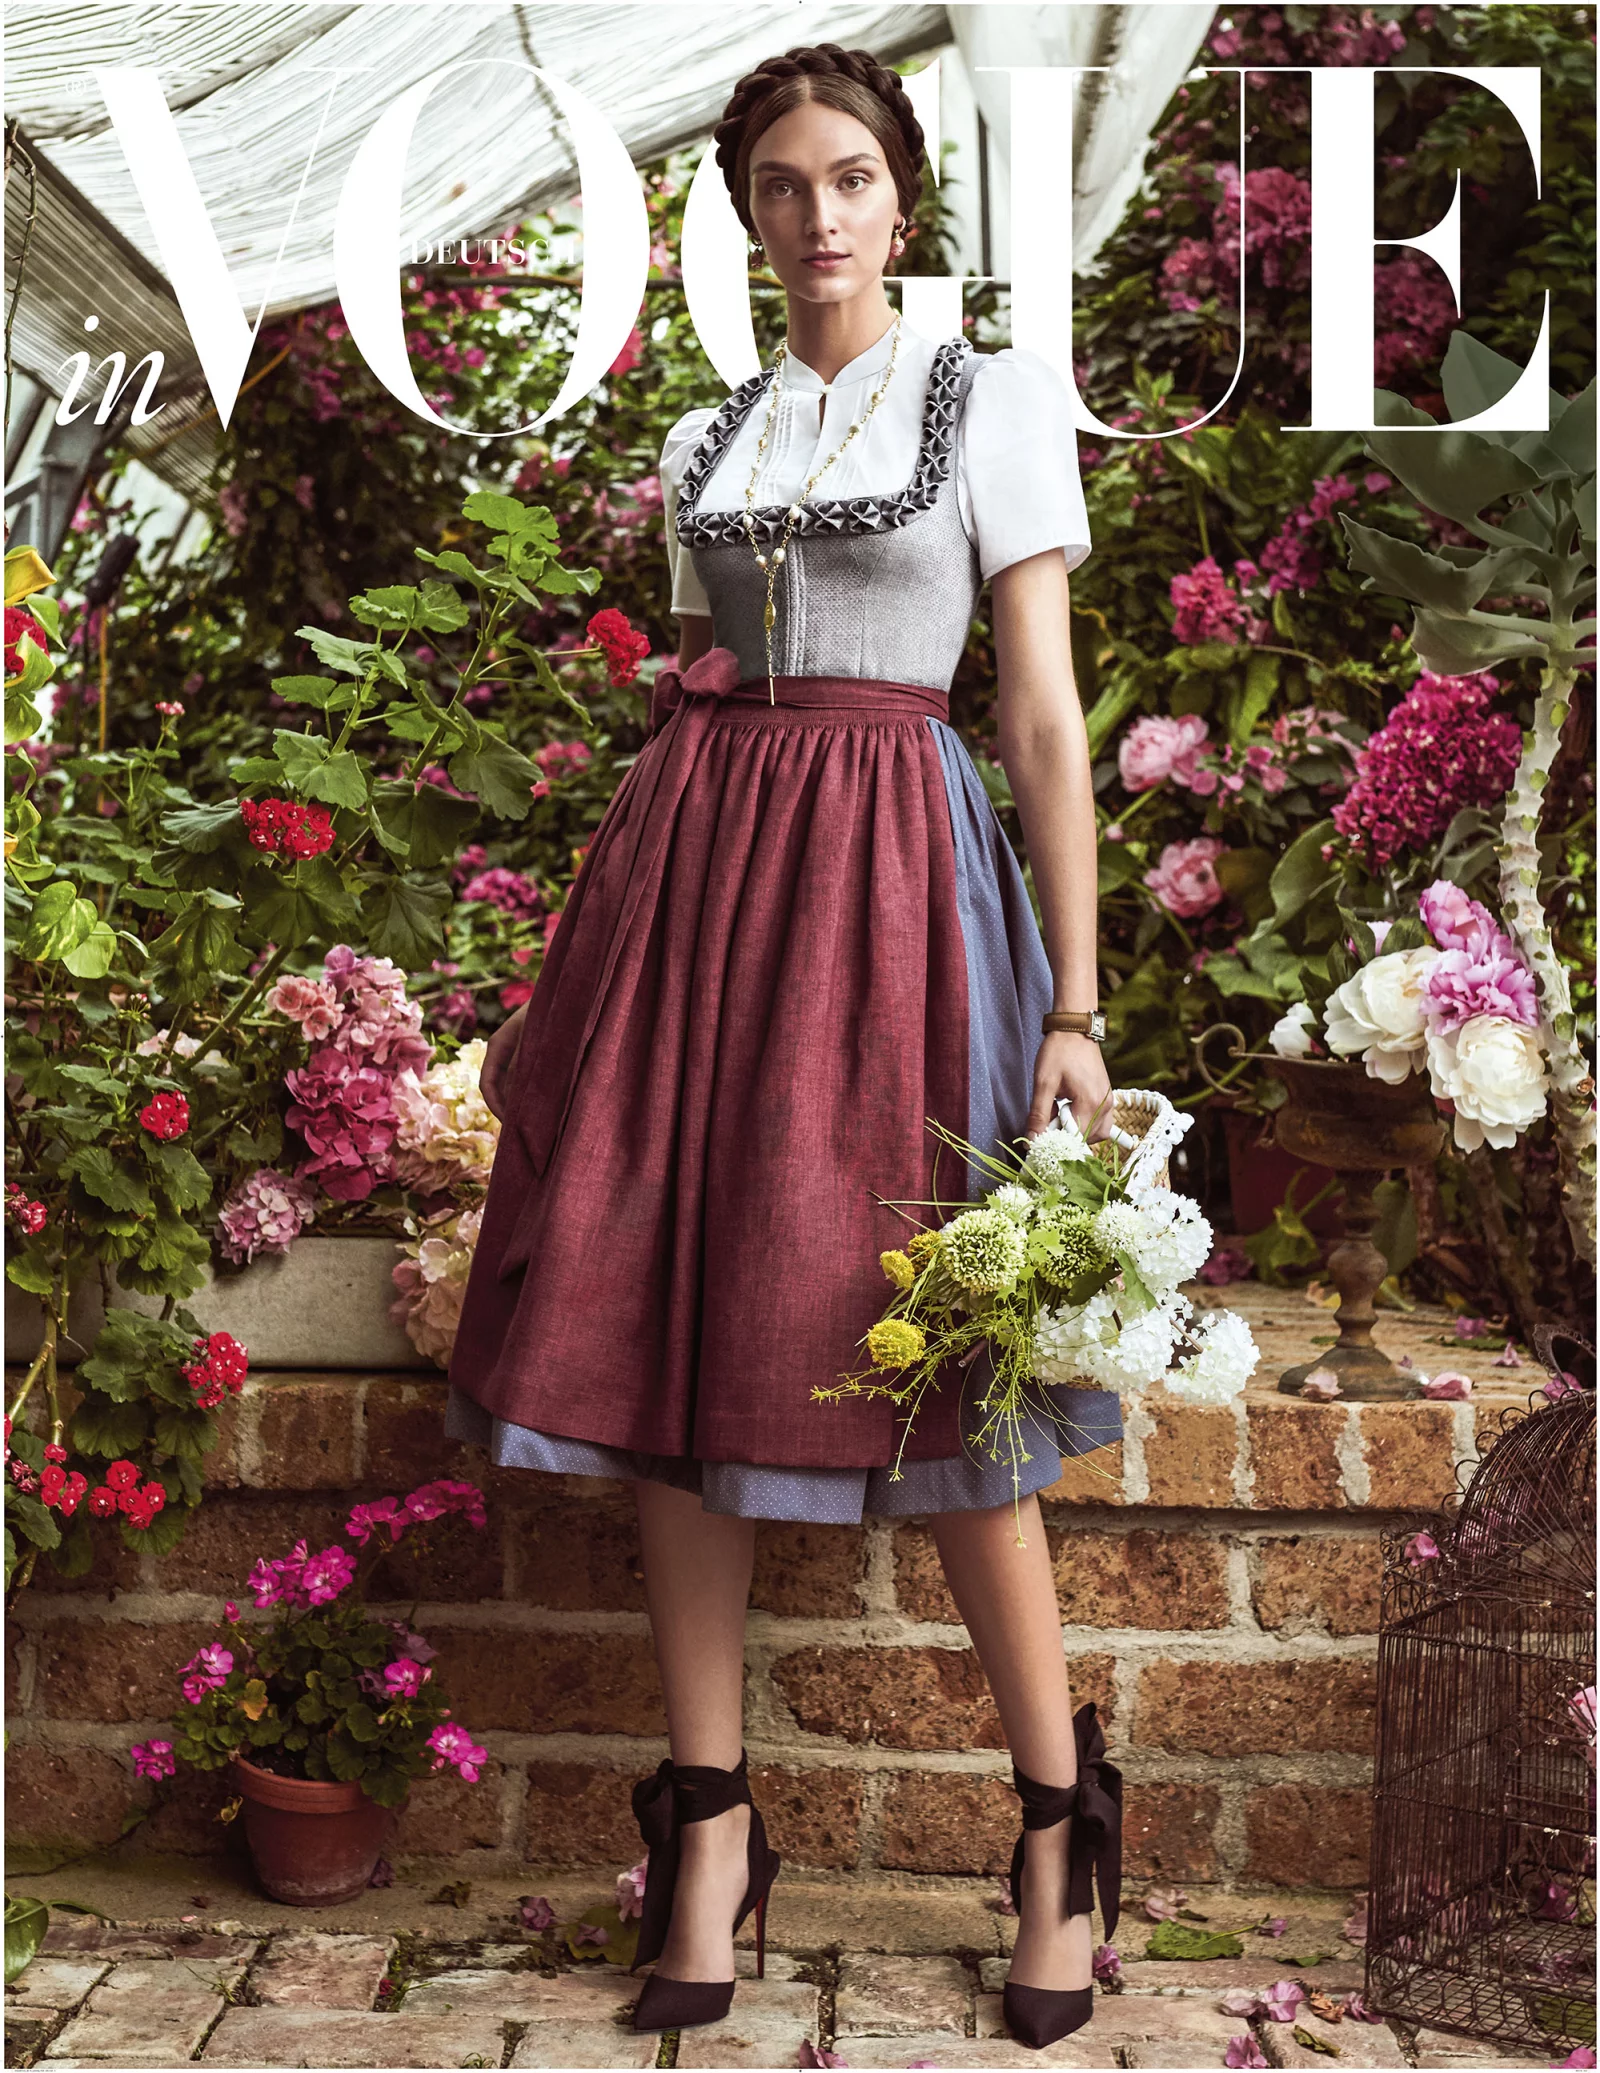 Lodenfrey for Vogue Germany 5 by Andreas ORTNER